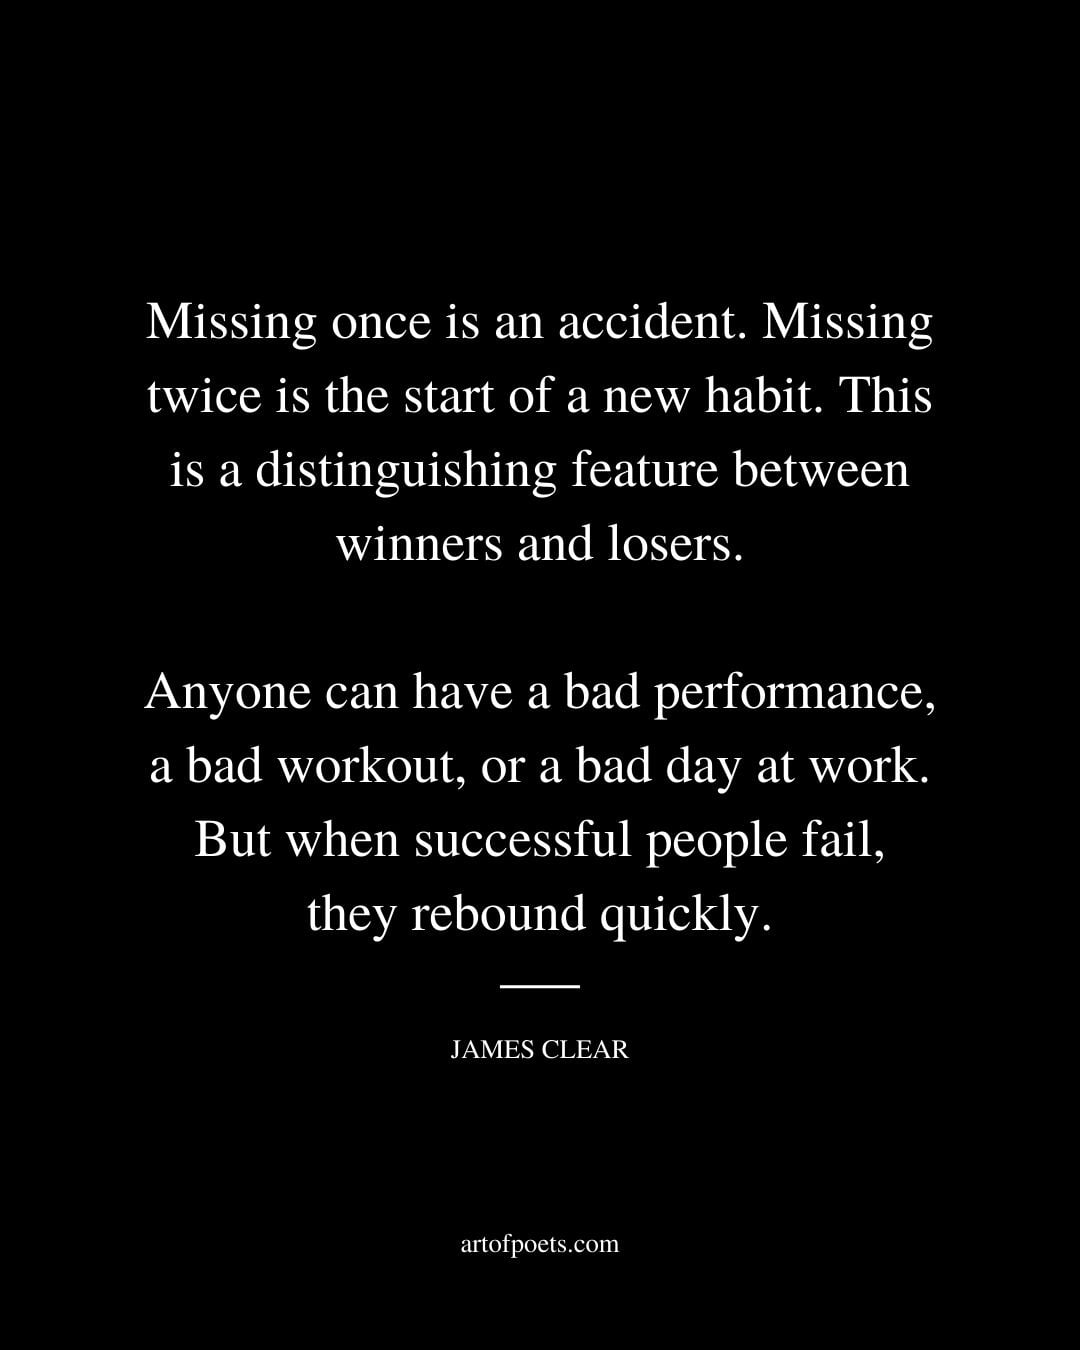 Missing once is an accident. Missing twice is the start of a new habit. This is a distinguishing feature between winners and losers